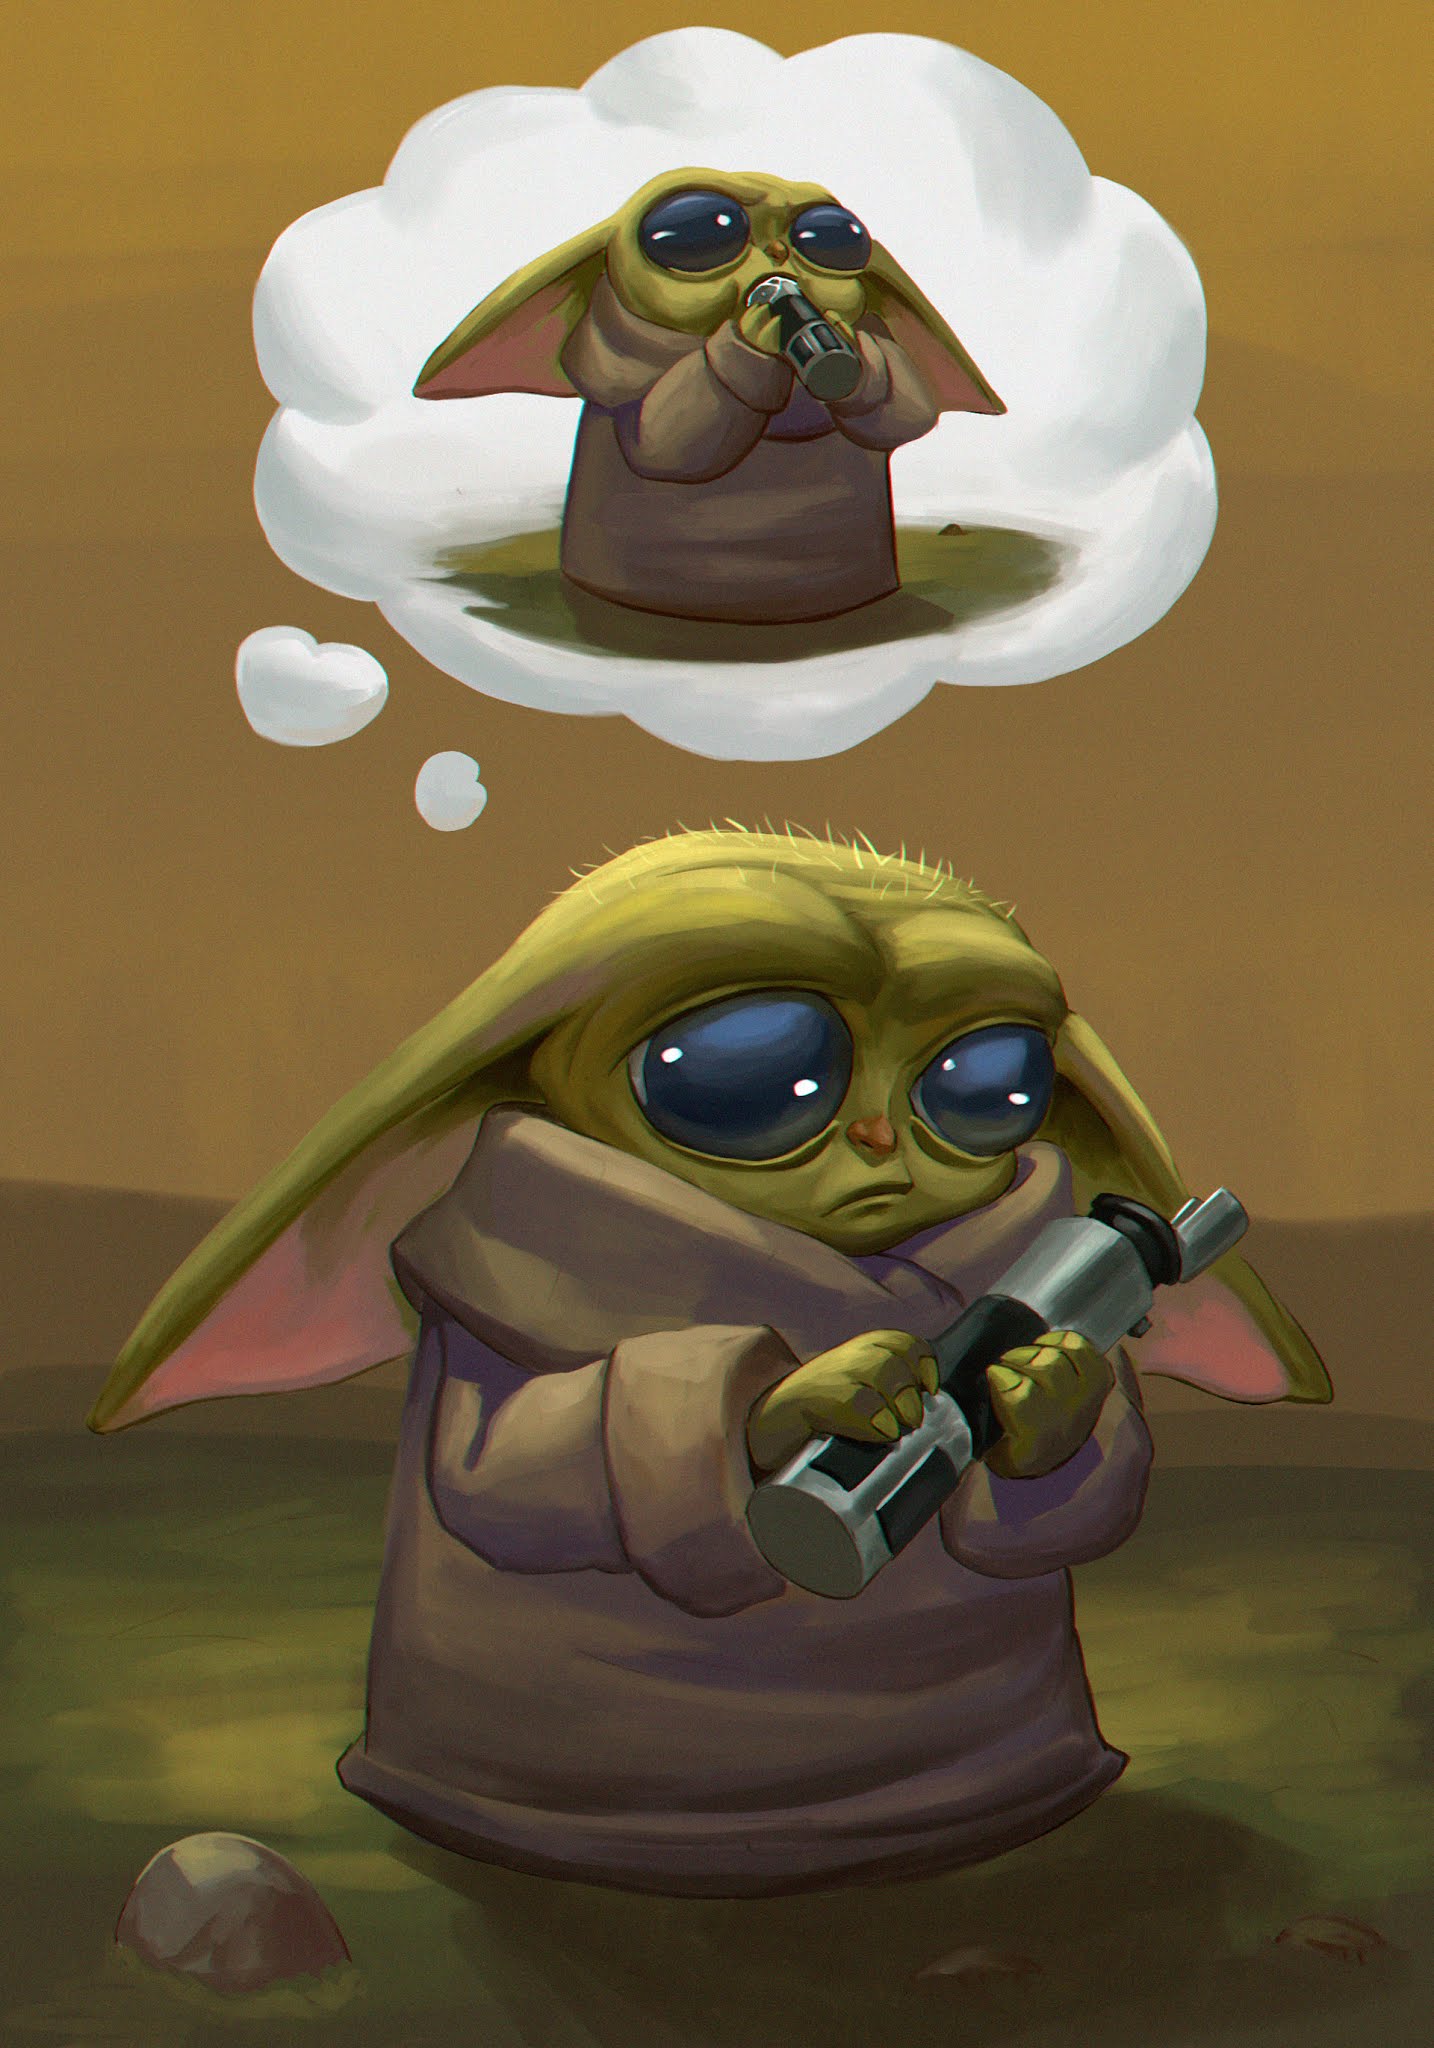 The child "Baby Yoda" phone wallpaper collection | Cool ...